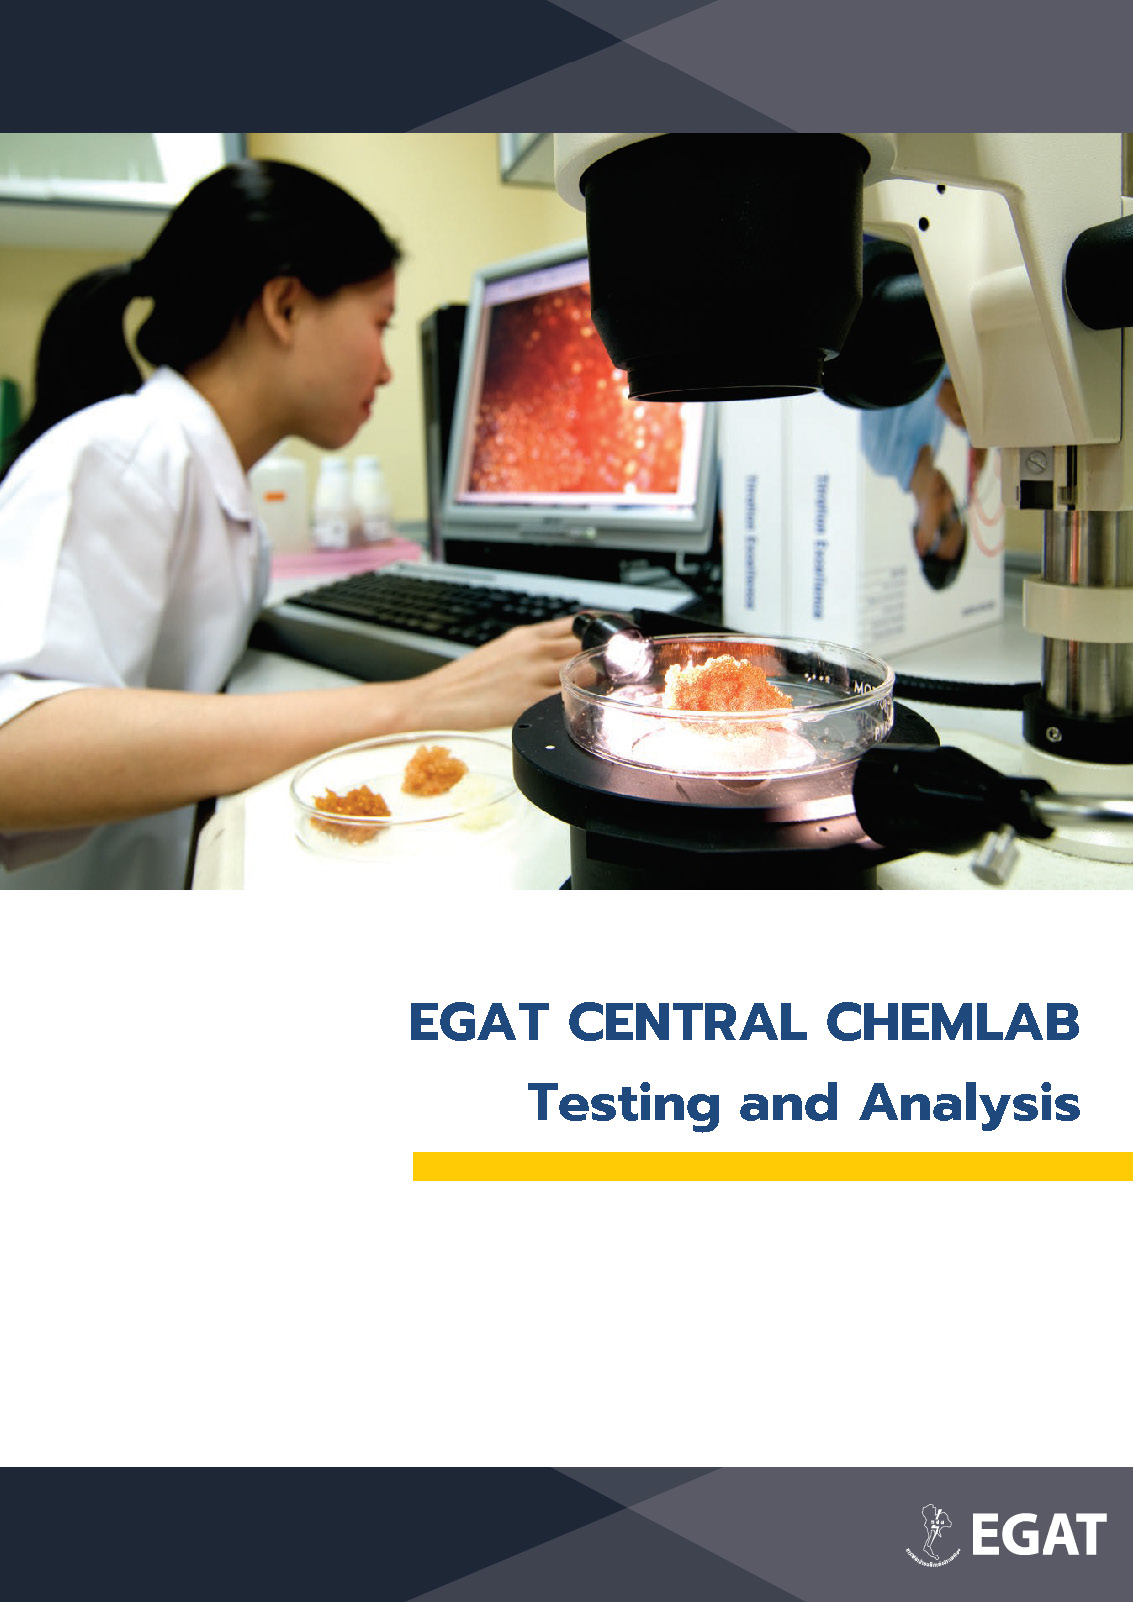 EGAT Central Chemlab Testing and Analysis